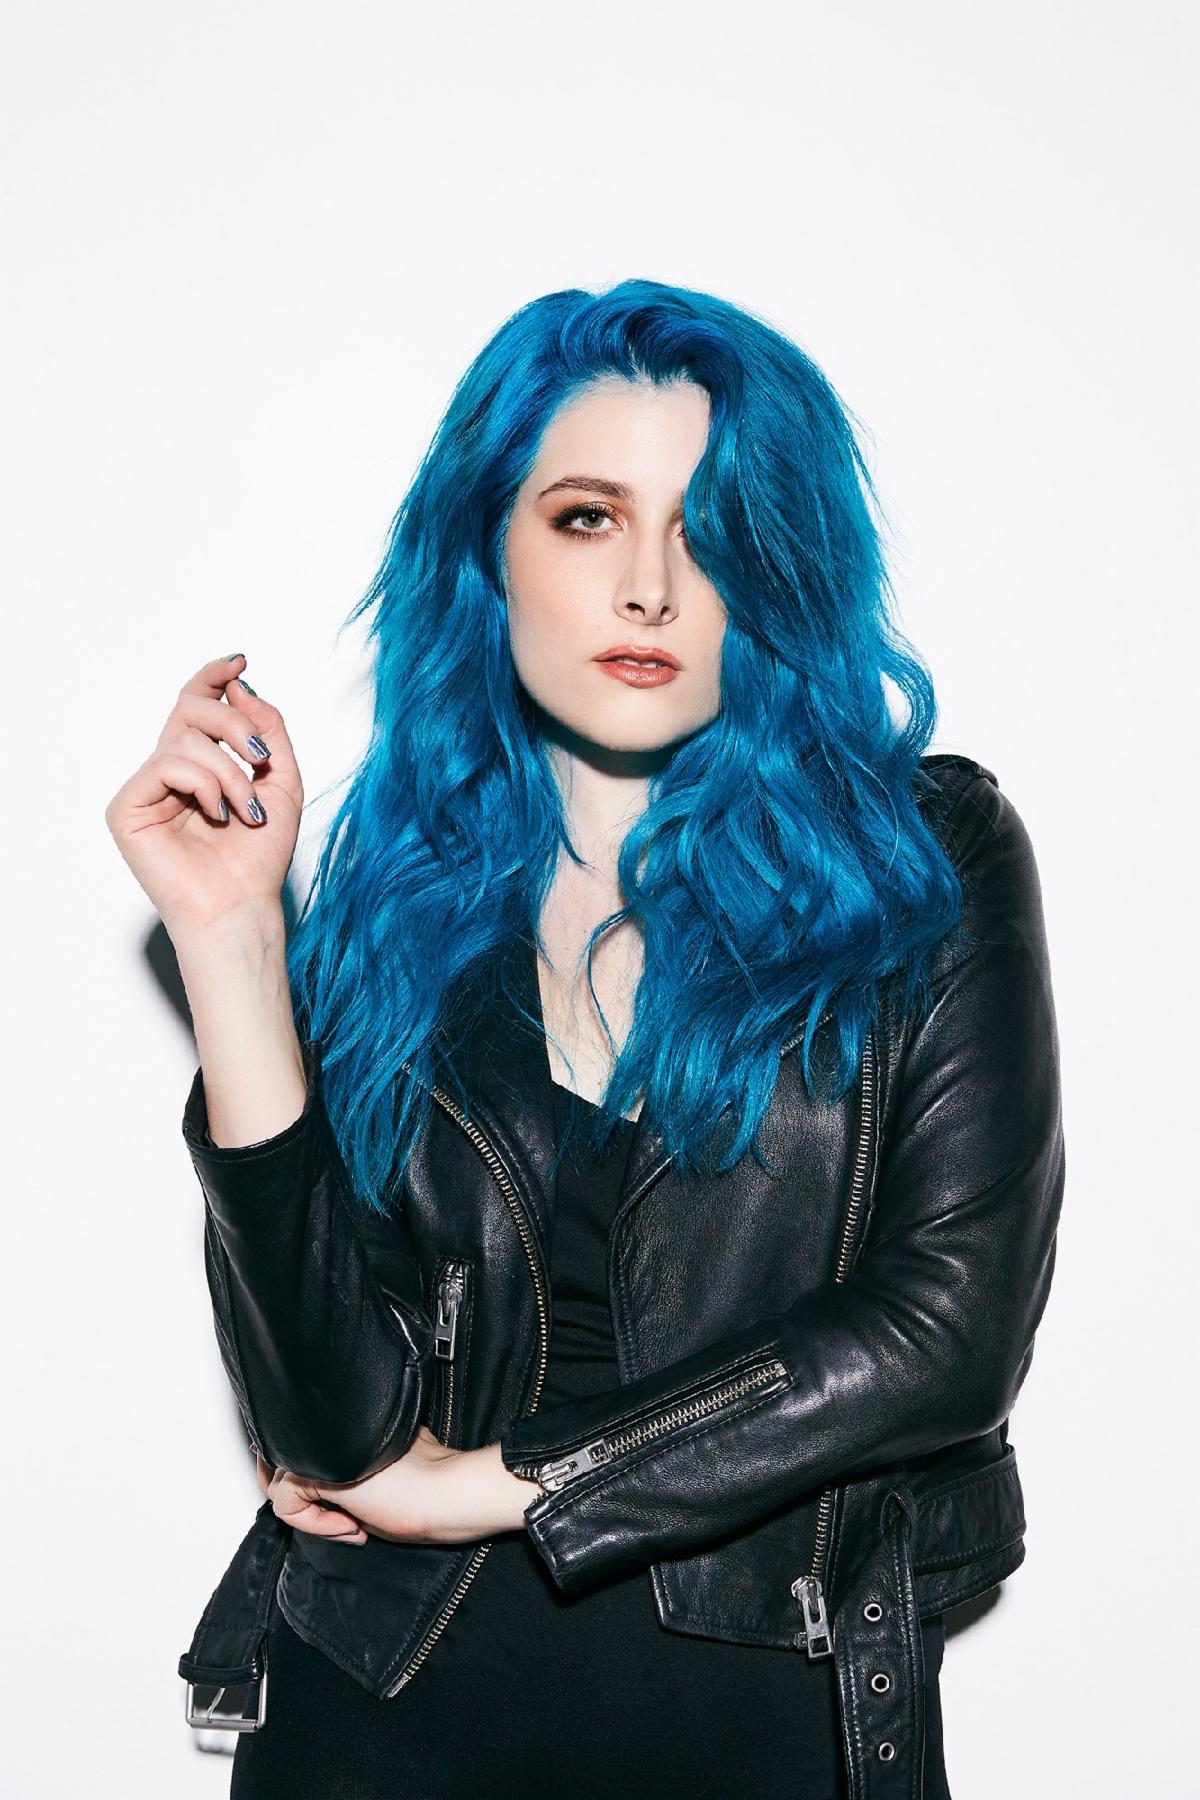 DIAMANTE Gets Personal on New Single "Obvious", Announces Departure From Label + New Music in 2020